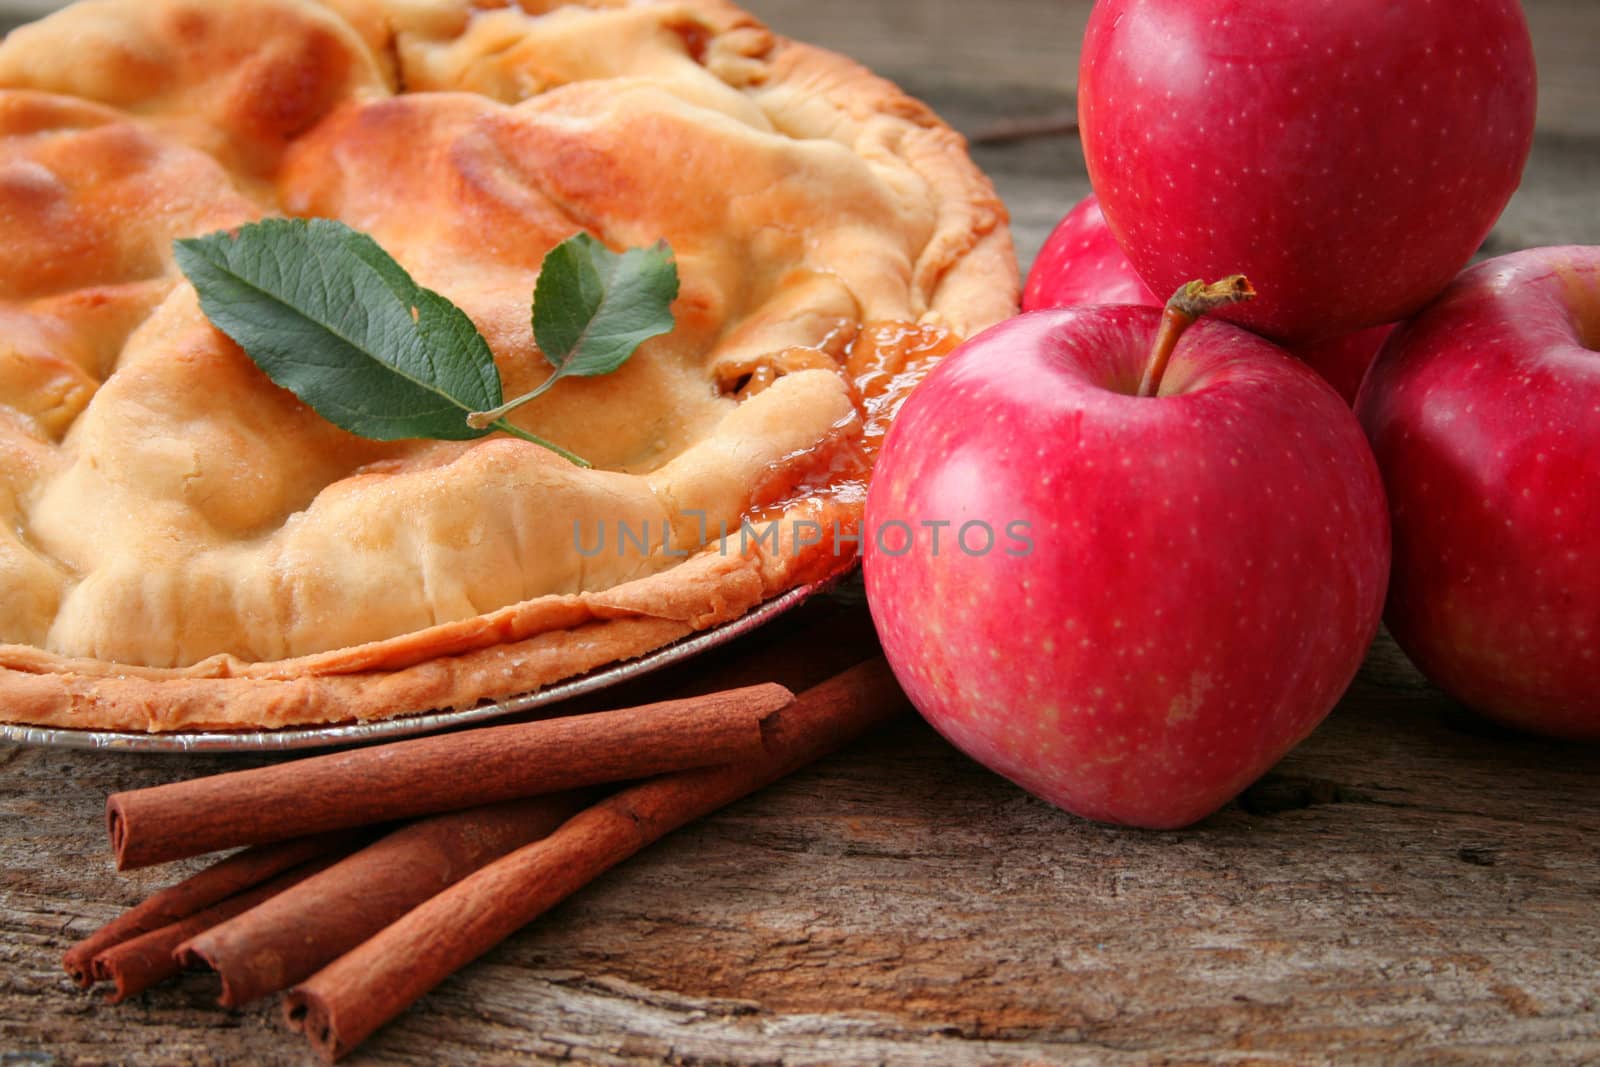 Home made Apple Pie by thephotoguy